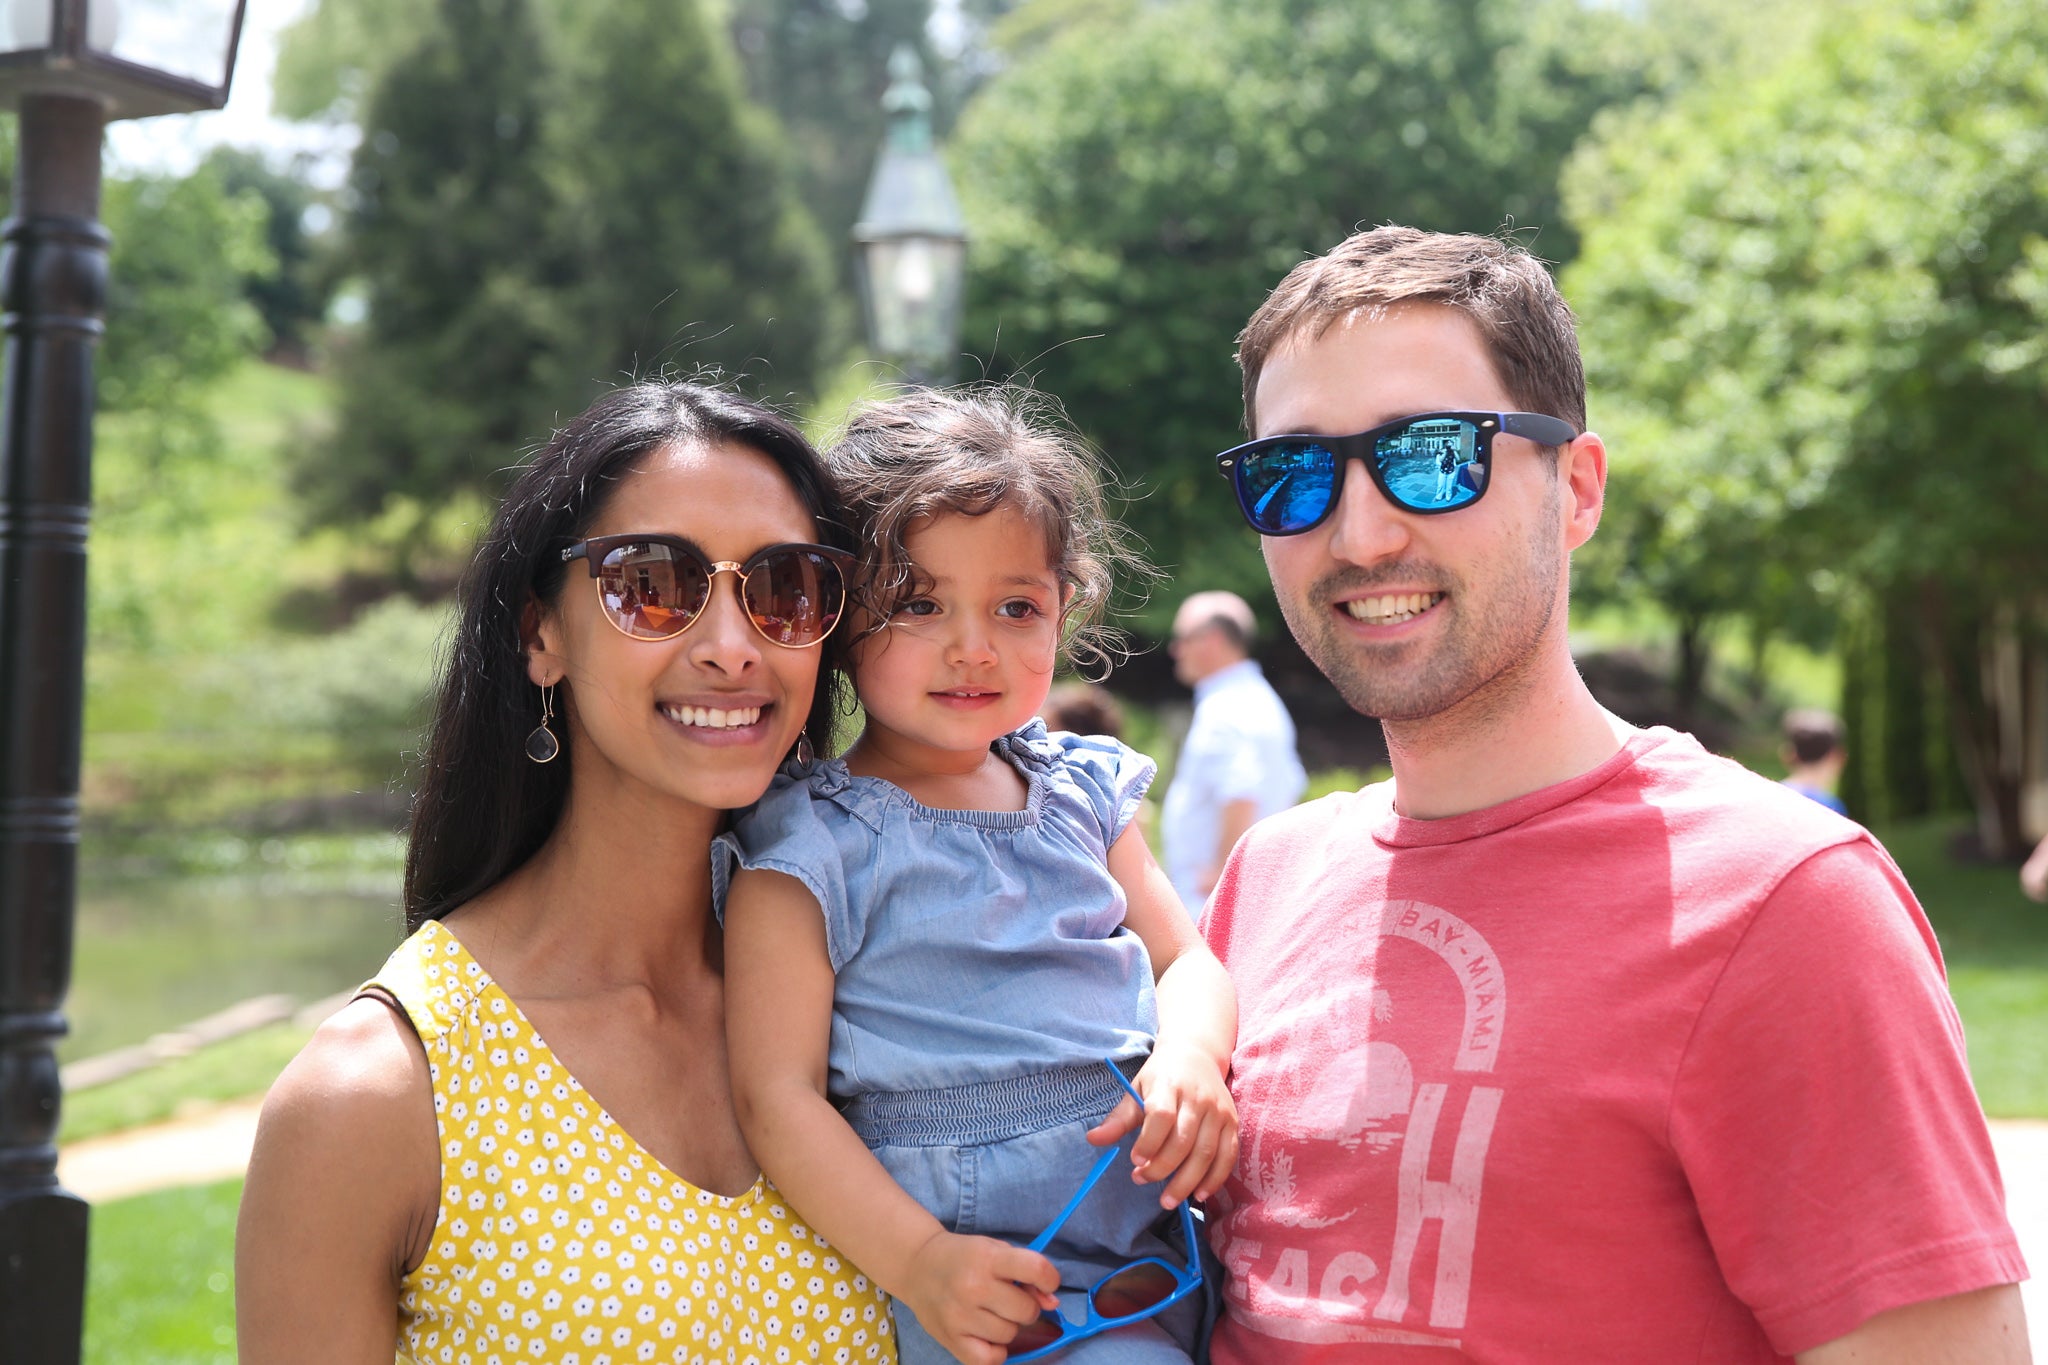 Interventional Radiology fellow Dr. Ally Baheti with her husband and daughter at the 2019 Keats Society Family Picnic